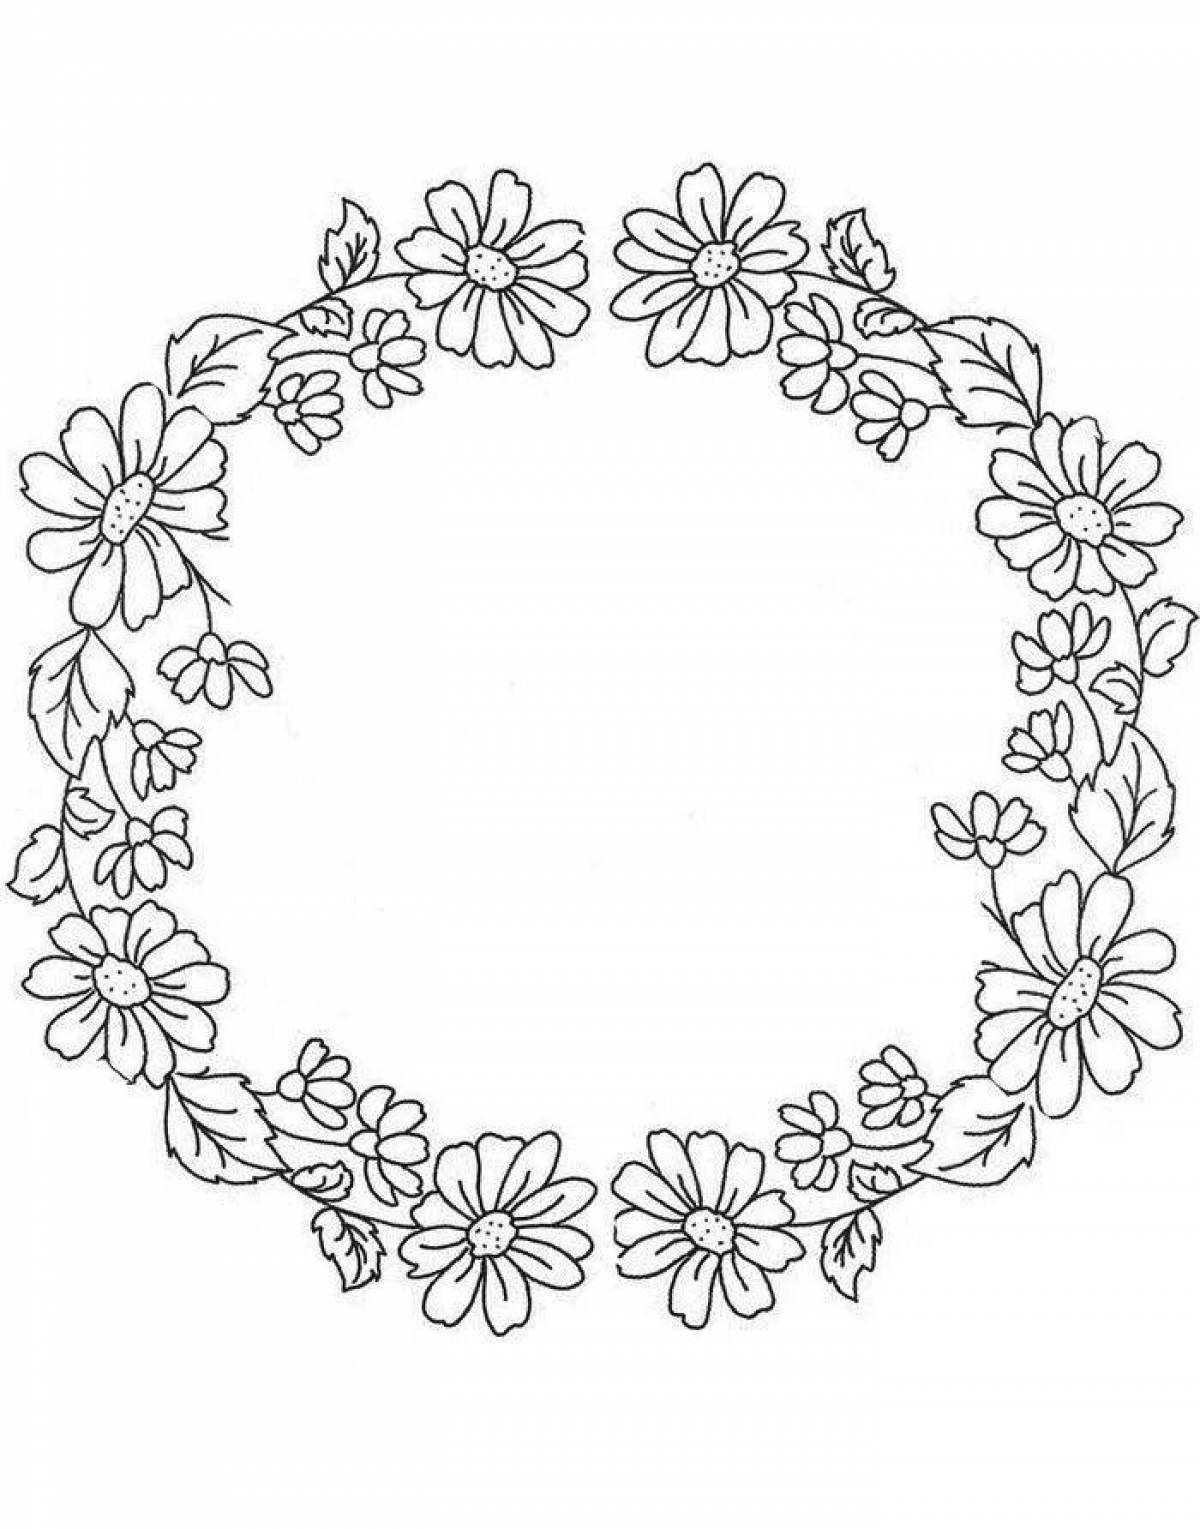 Coloring page sweet wreath